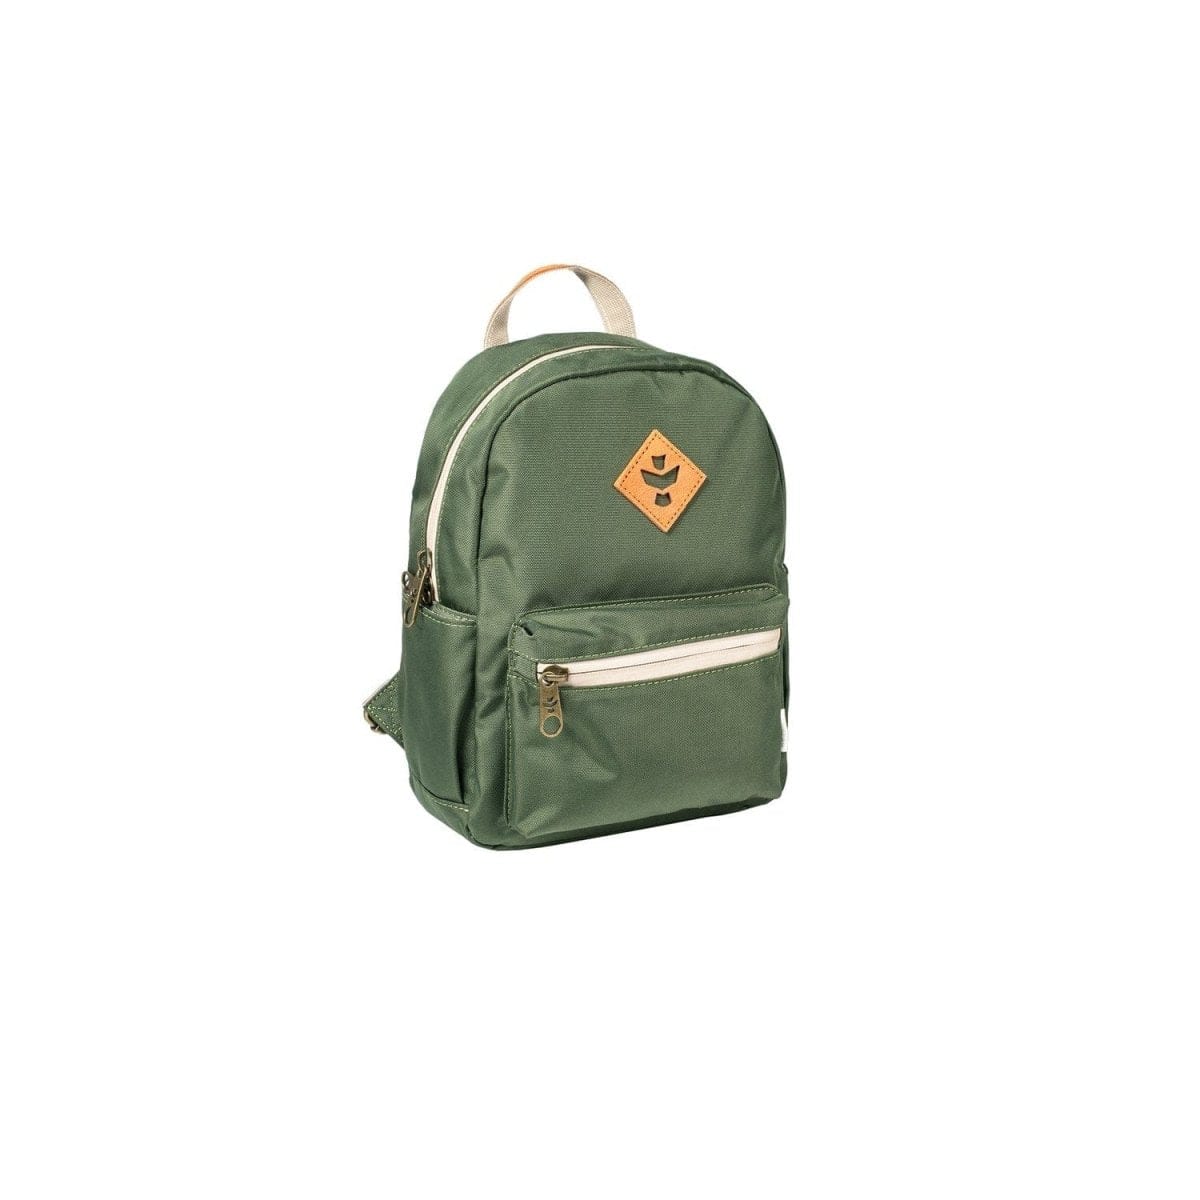 Revelry Supply Travel Bag Green The Shorty - Smell Proof Mini Backpack